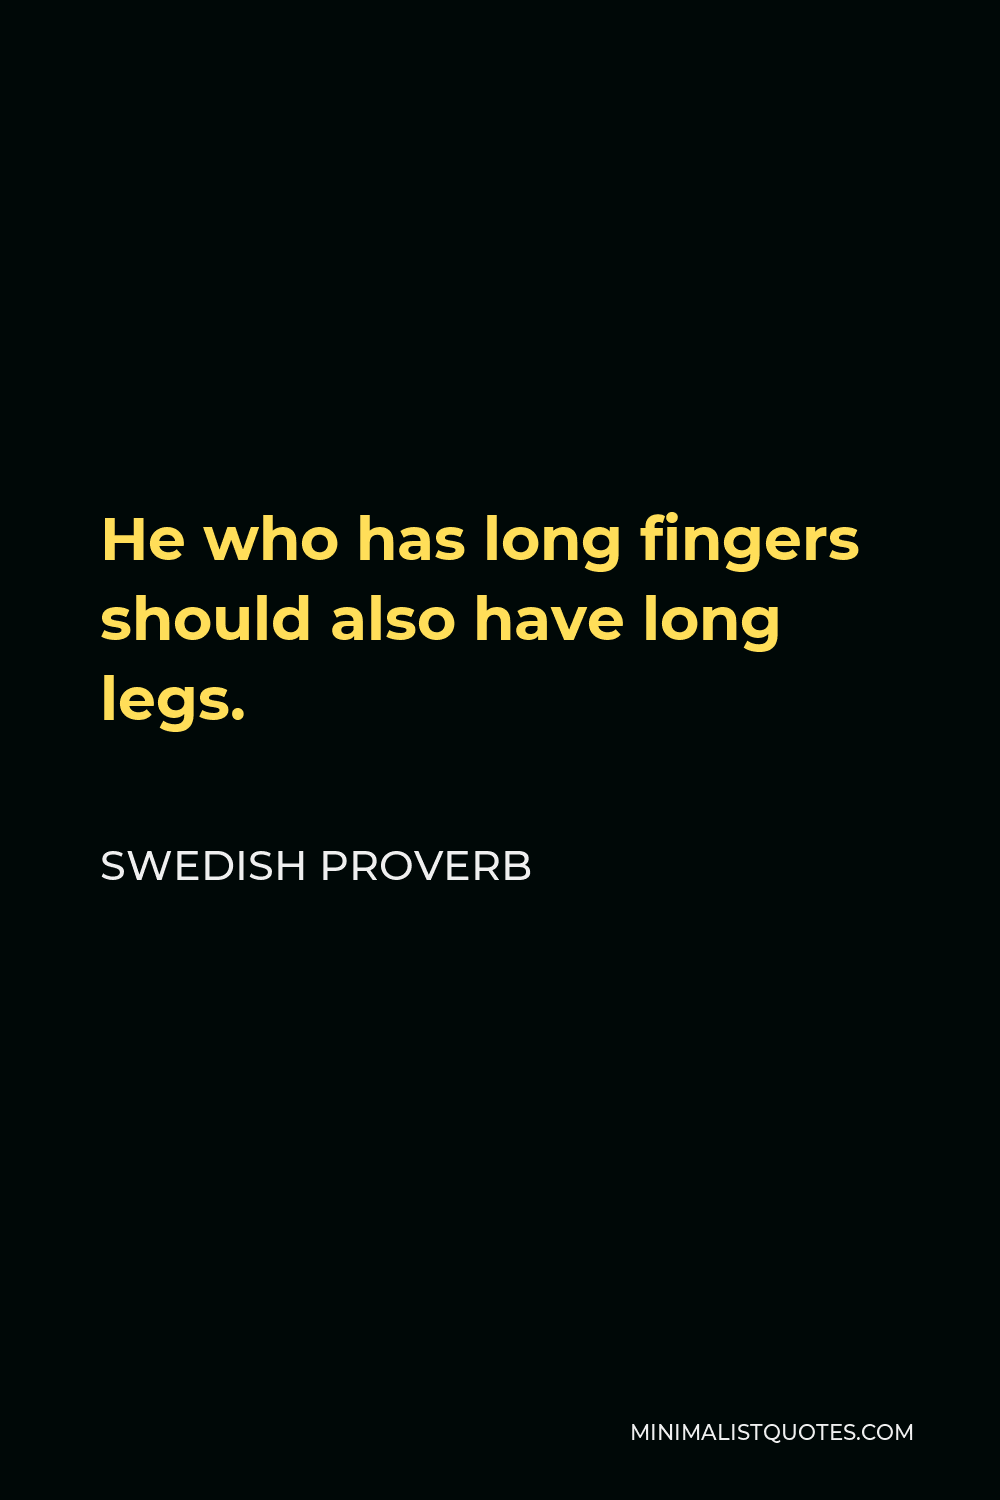 Swedish Proverb Quote - He who has long fingers should also have long legs.